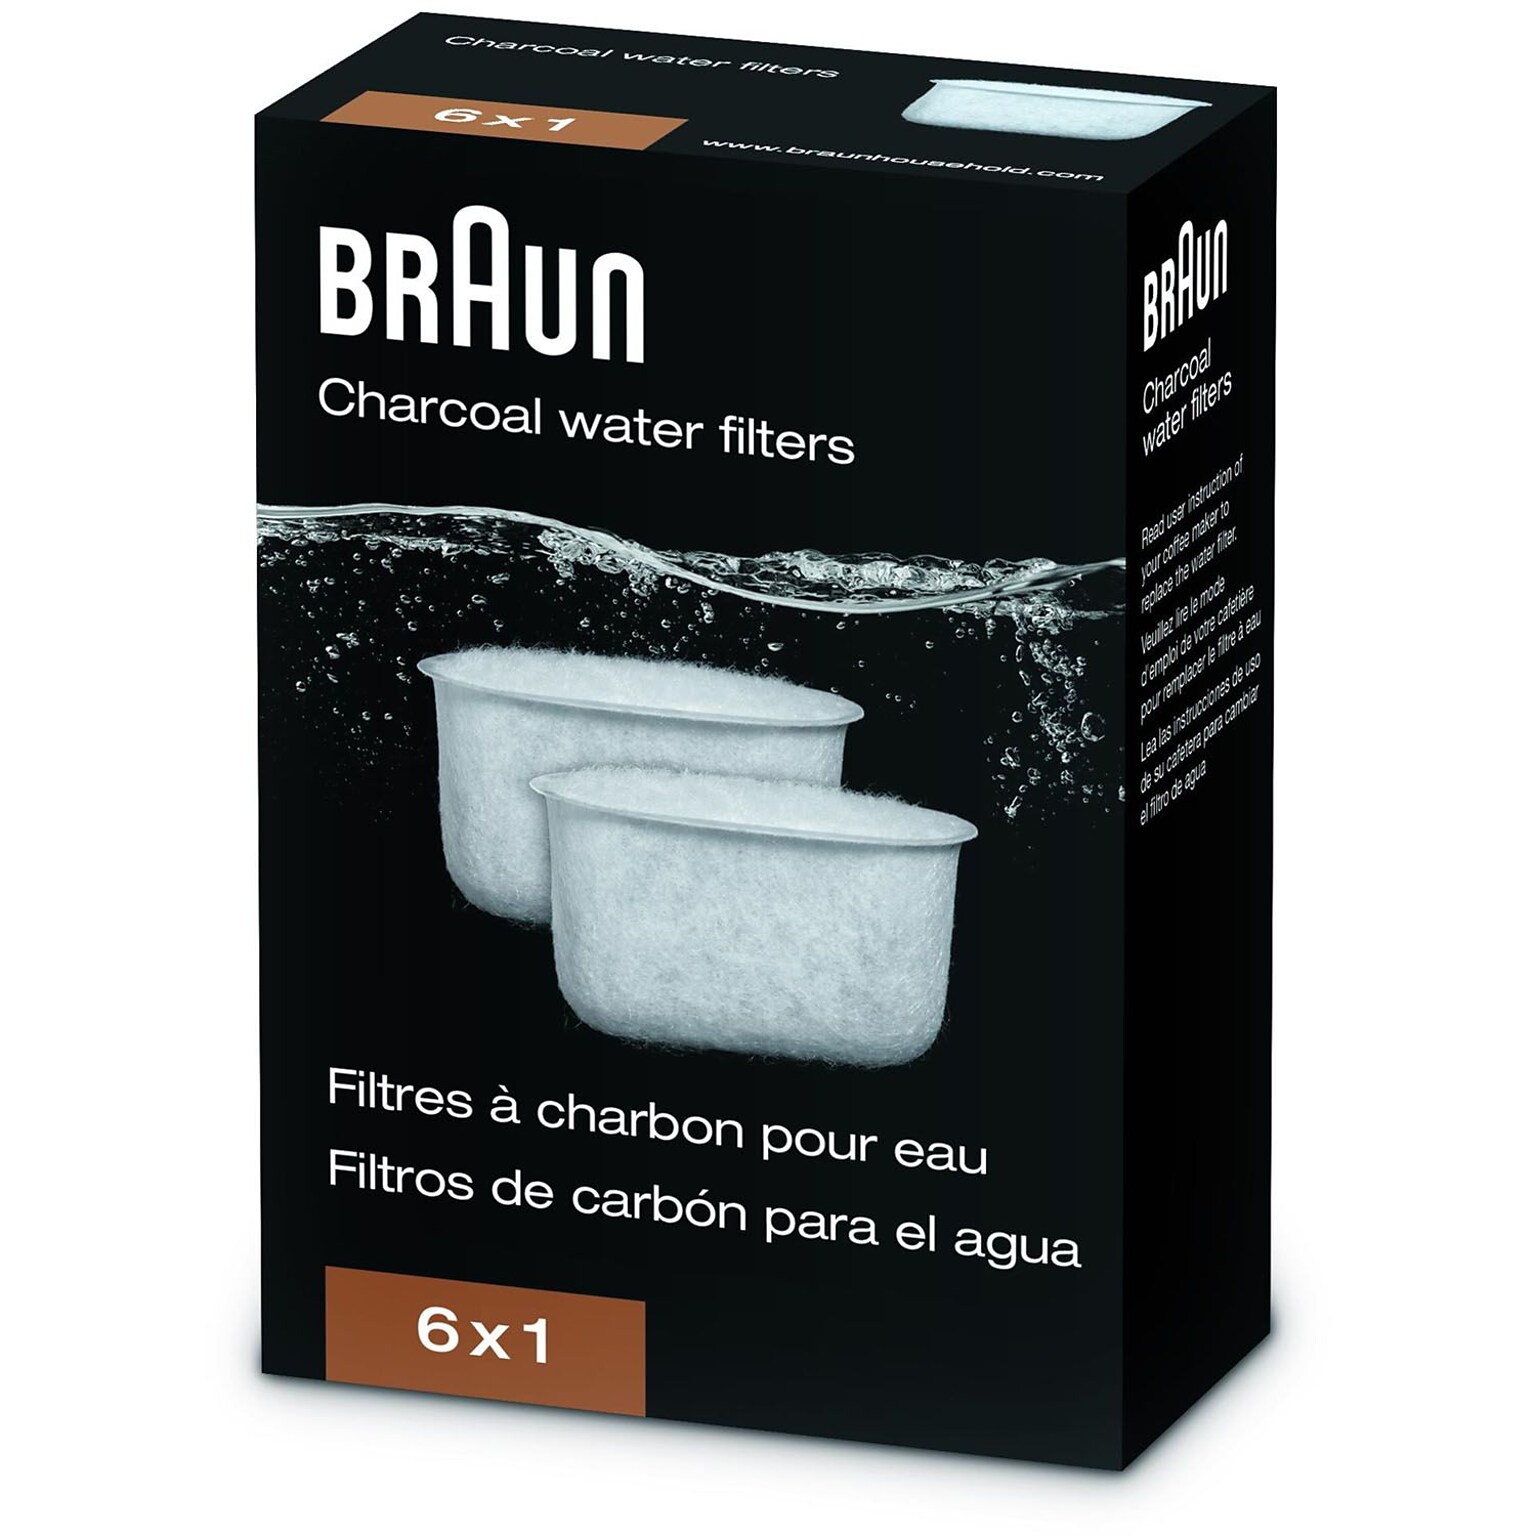 Braun Charcoal Water Filter for BrewSense Drip Coffee Makers (24255370)